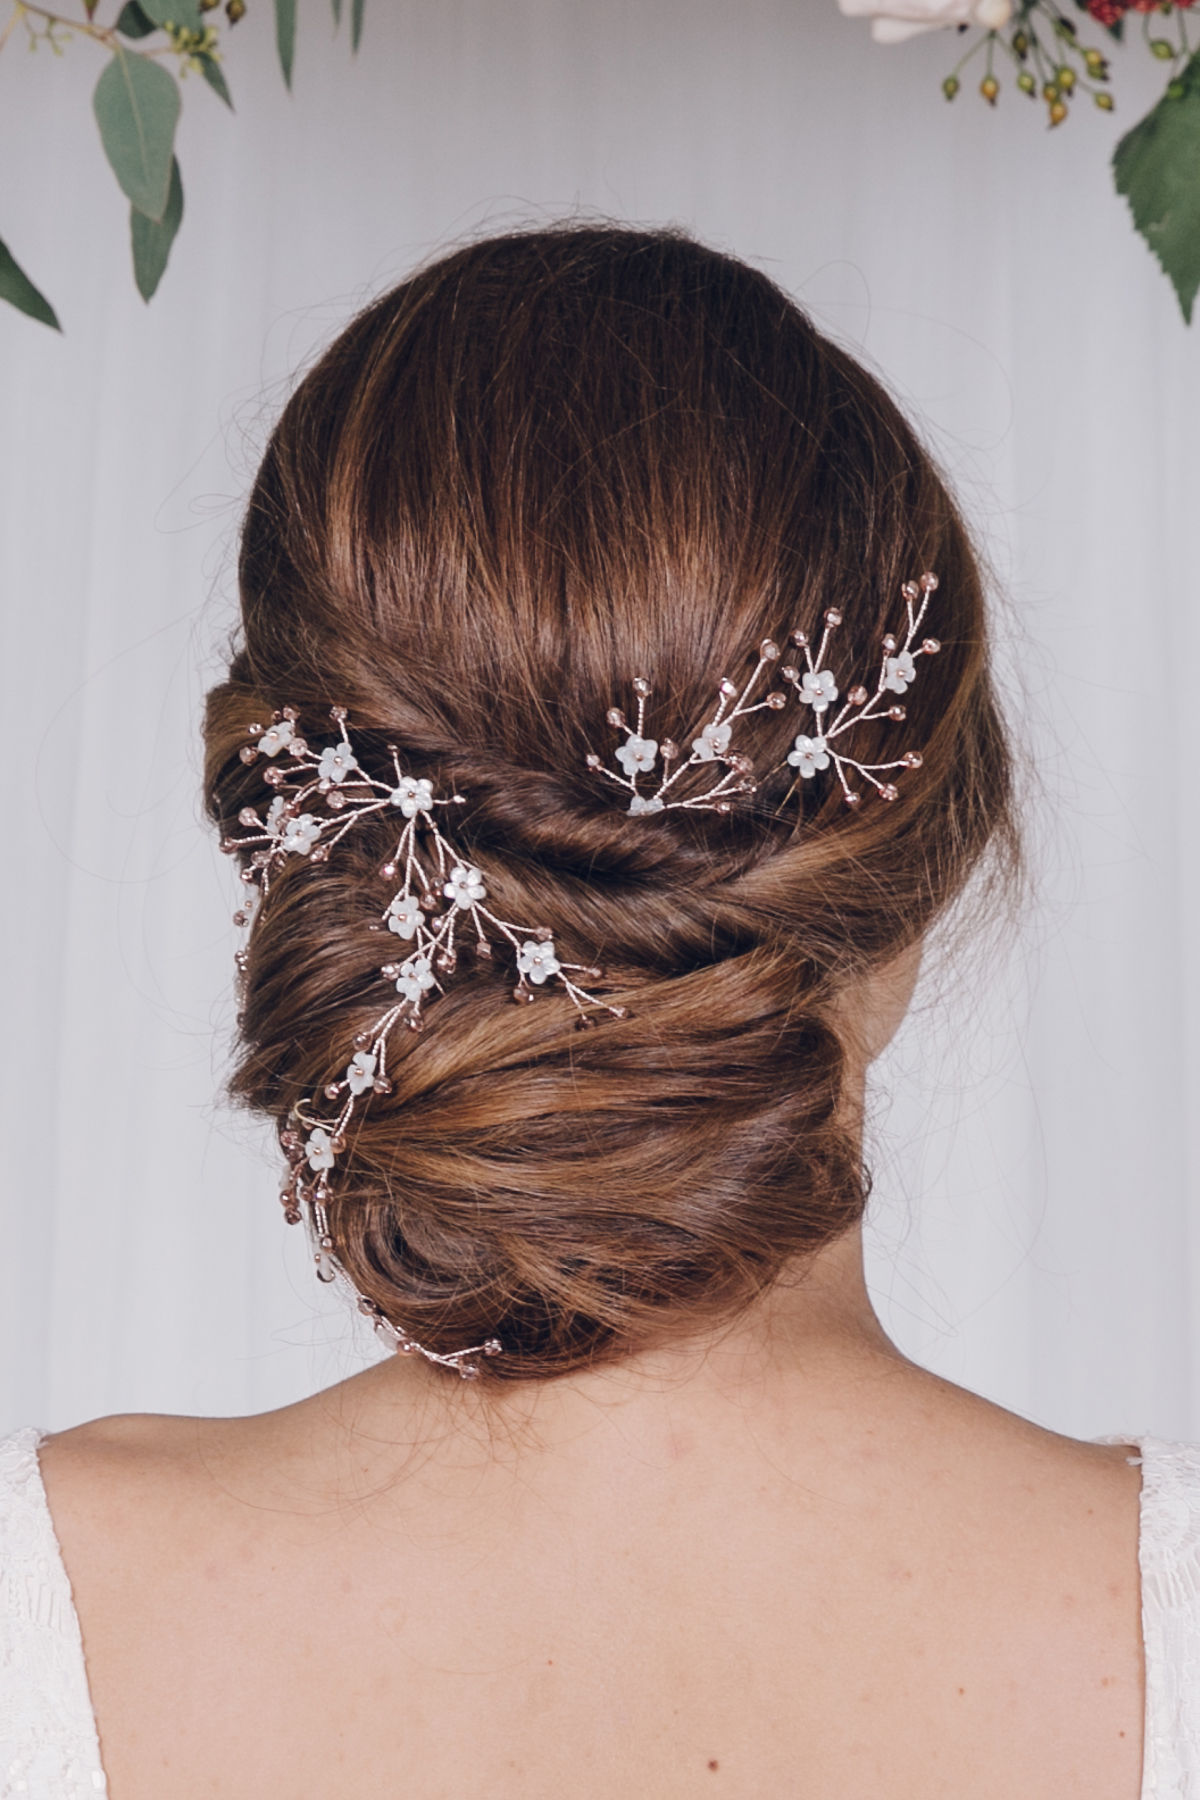 A guide to bridal hair accessory styling with Debbie Carlisle.